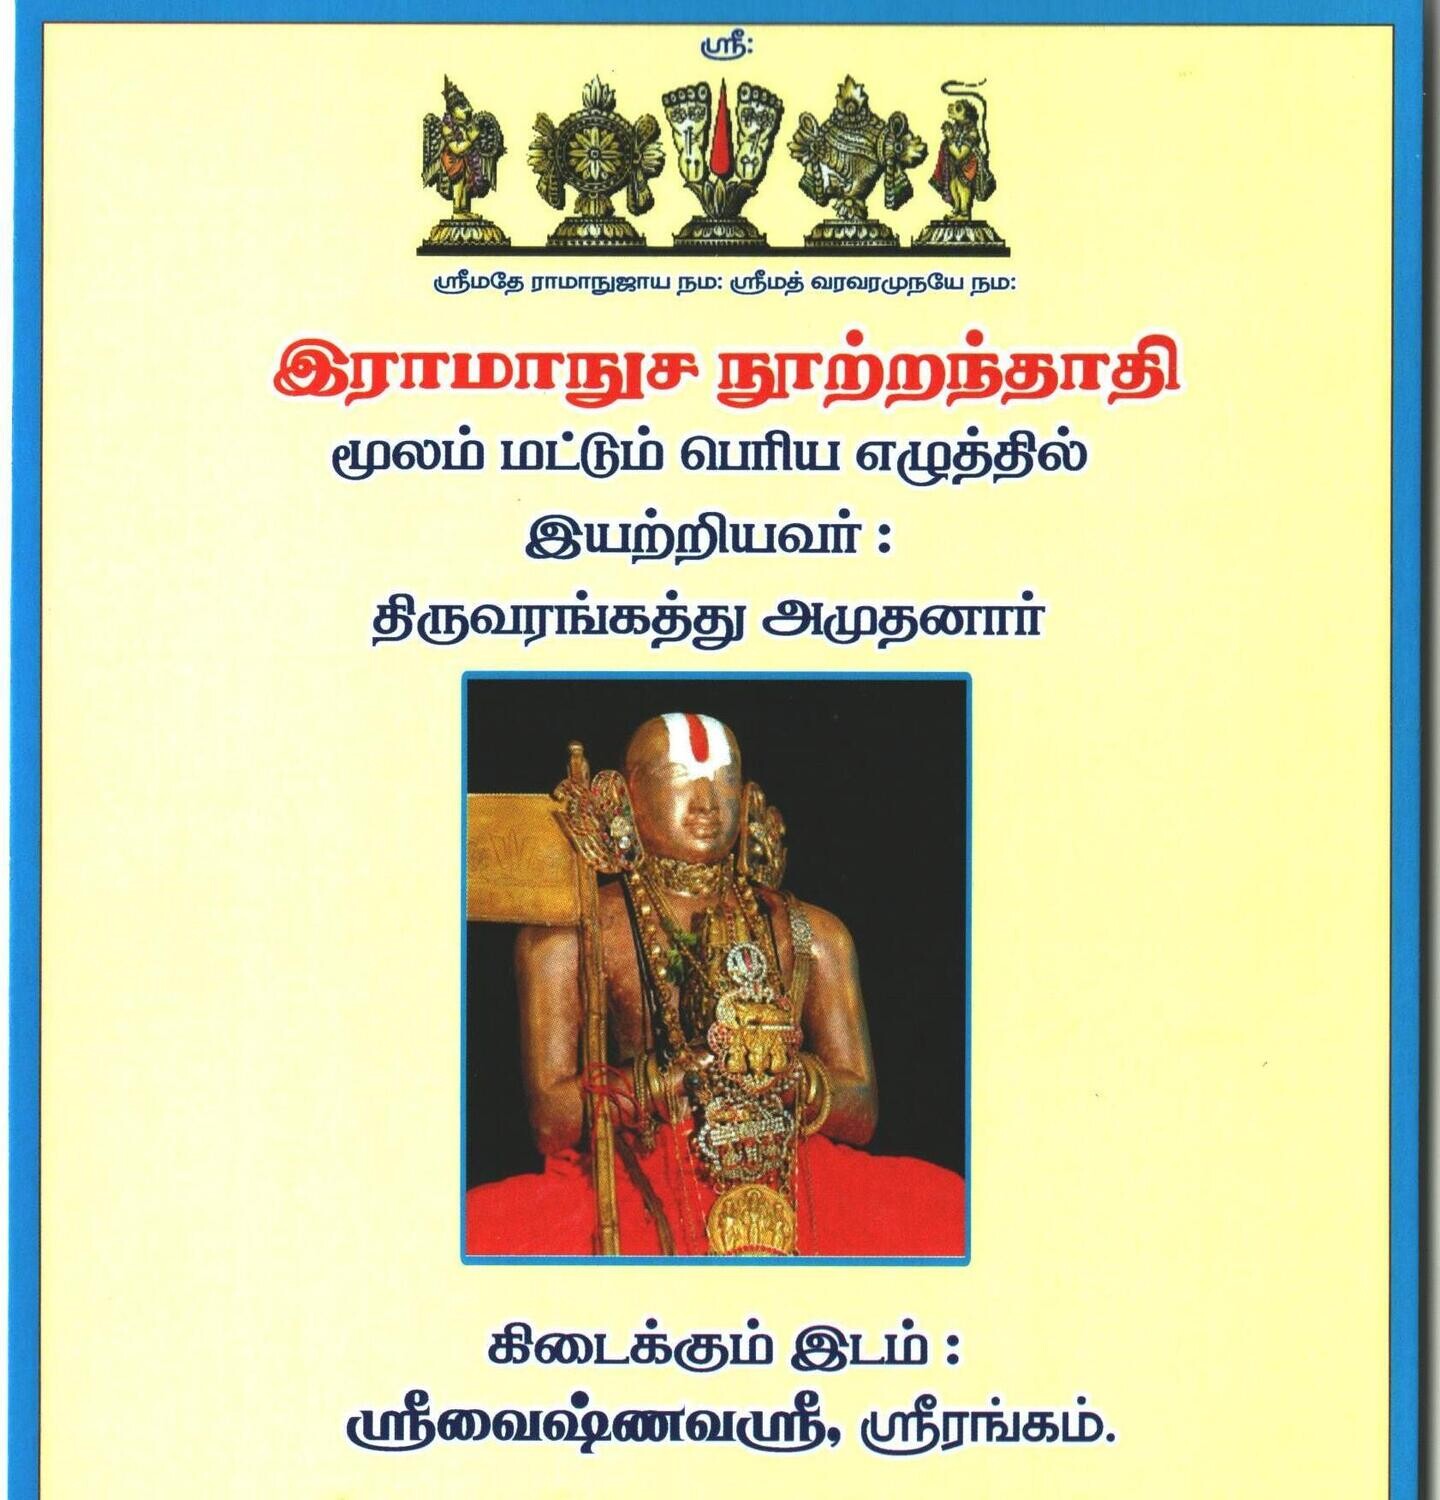 Ramanuja nootranthathi, Tamil Big letters A4, Only moola pasuram,no meaning.